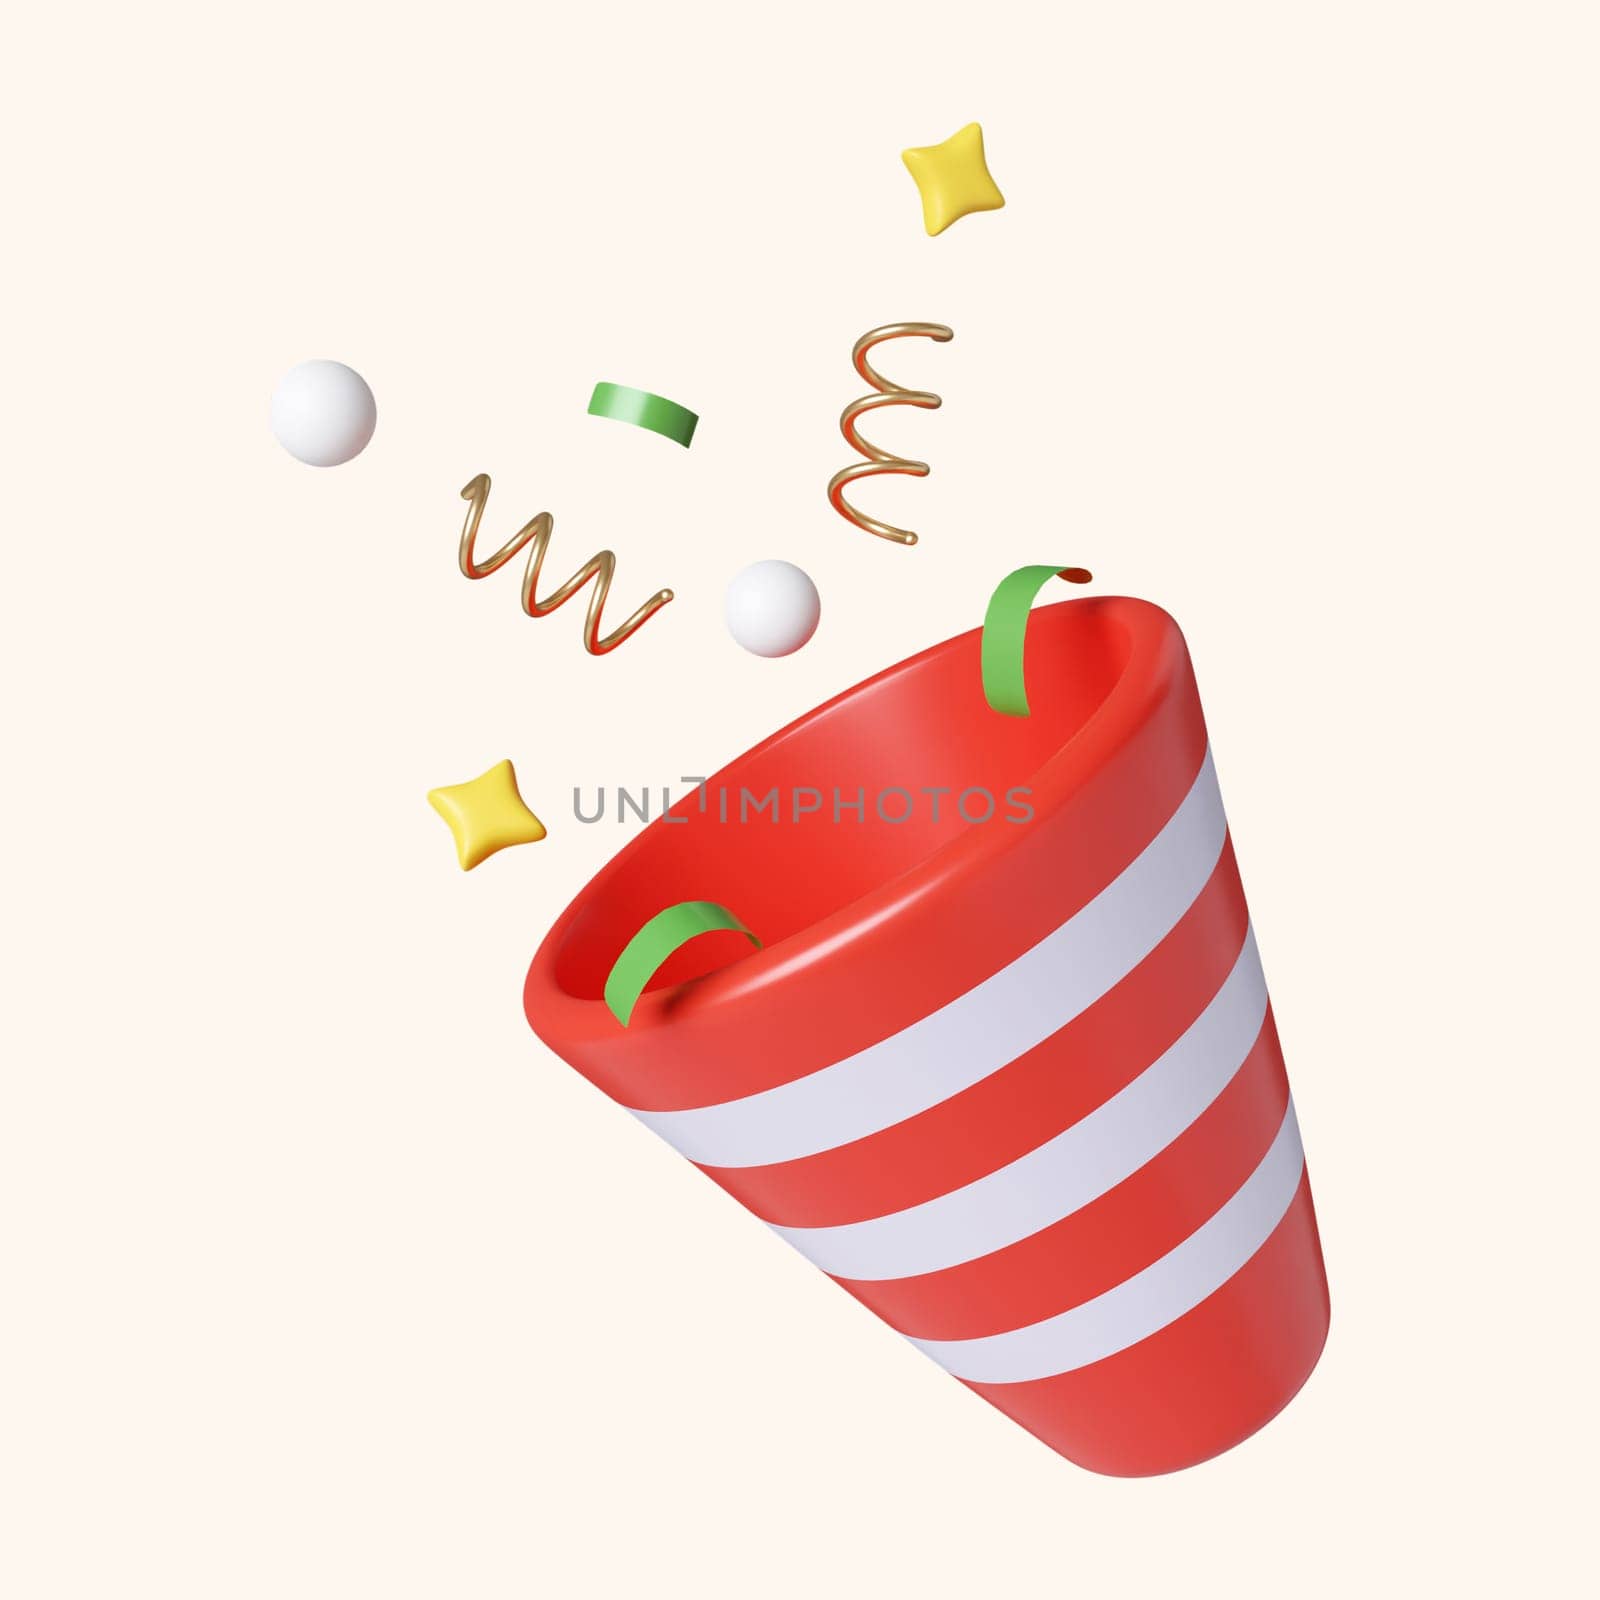 3d Christmas Party cracker icon. minimal decorative festive conical shape tree. New Year's holiday decor. 3d design element In cartoon style. Icon isolated on white background. 3D illustration by meepiangraphic